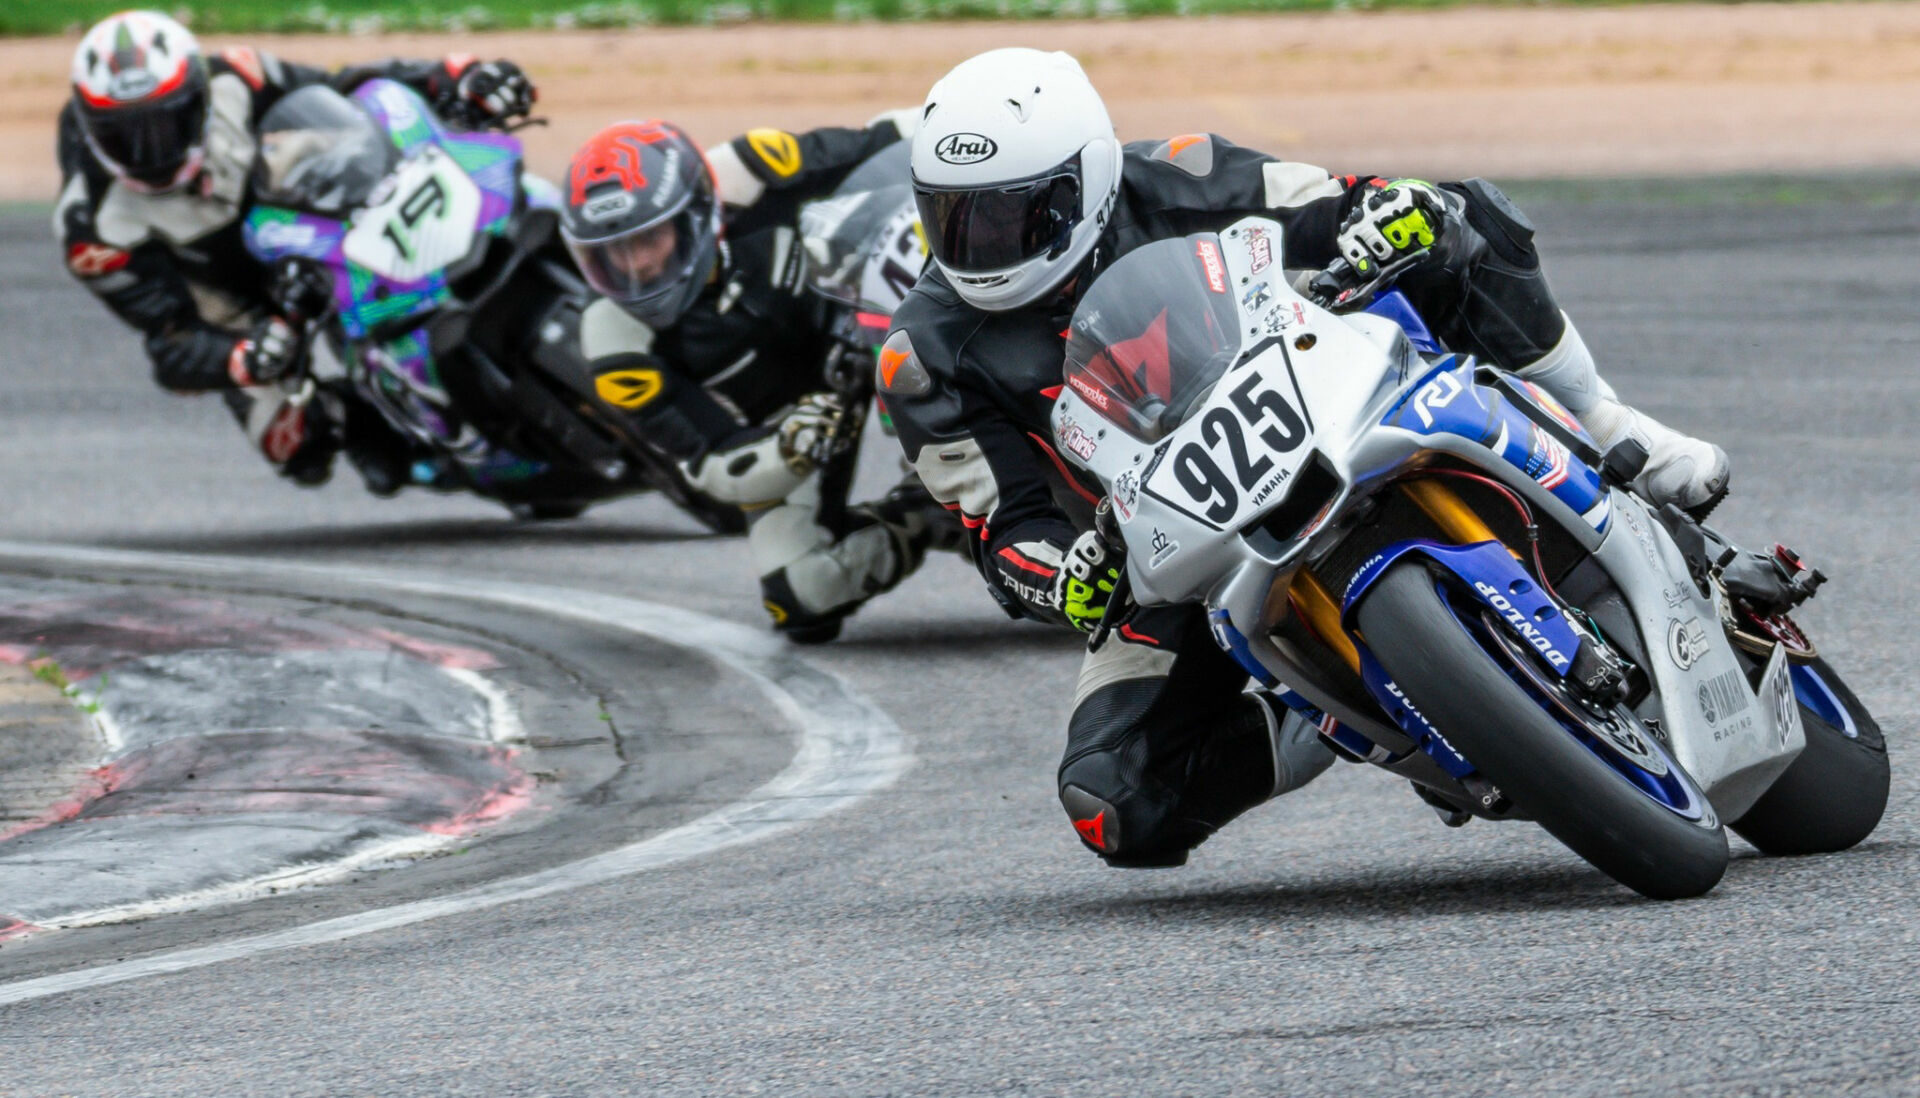 Chris Higgins (925) leads Ken Yee (433) and Dan Spurlock (19) through the infield during Round Two of the 2023 MRA season, at Pikes Peak International Raceway. Photo by Kelly Vernell, courtesy MRA.